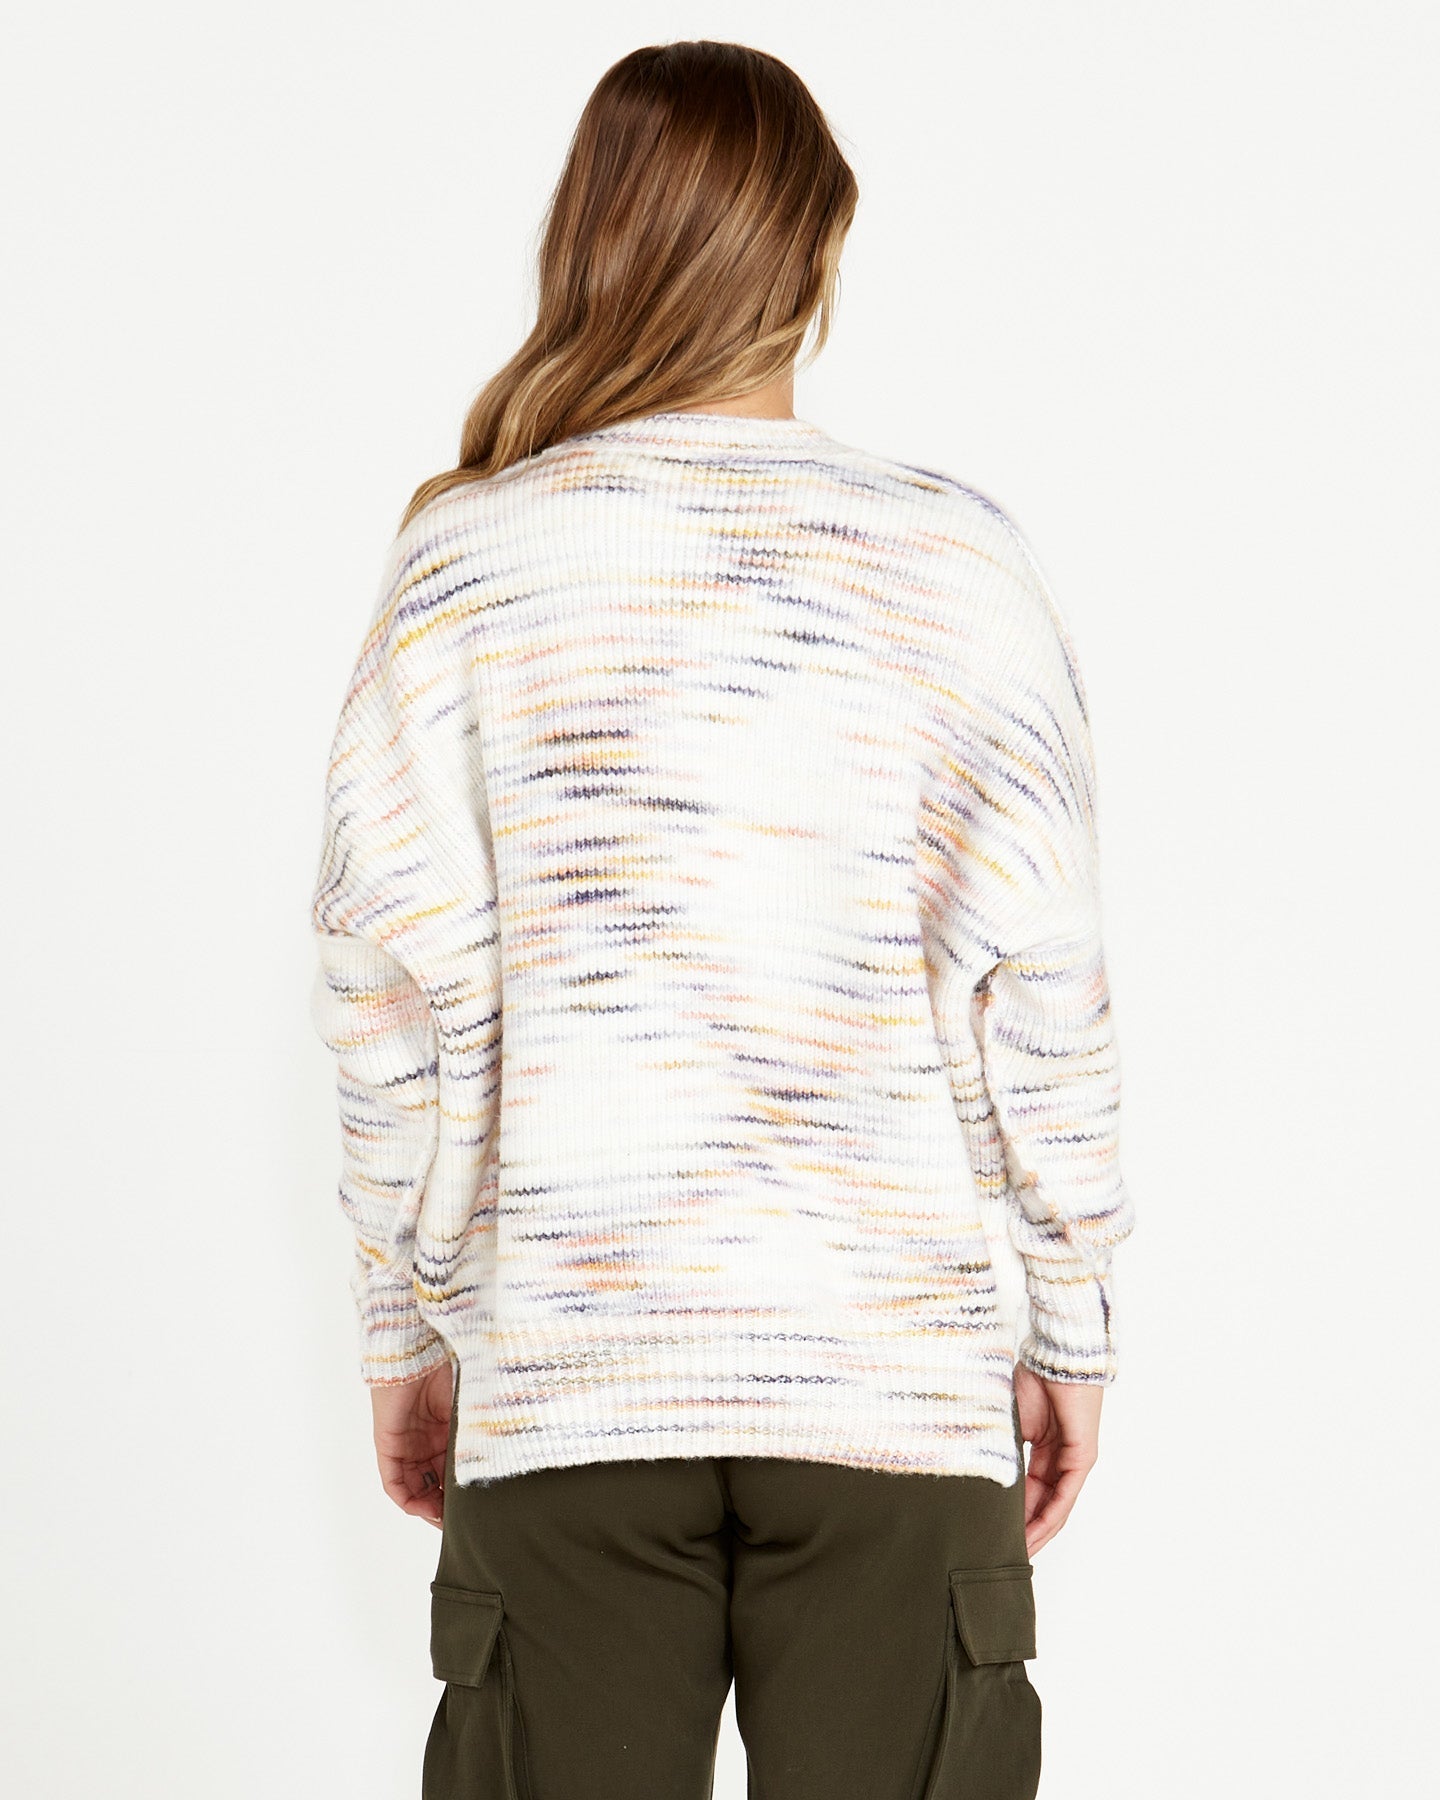 Pepper Space Jumper - Rainbow Marle-Knitwear & Jumpers-SASS-The Bay Room